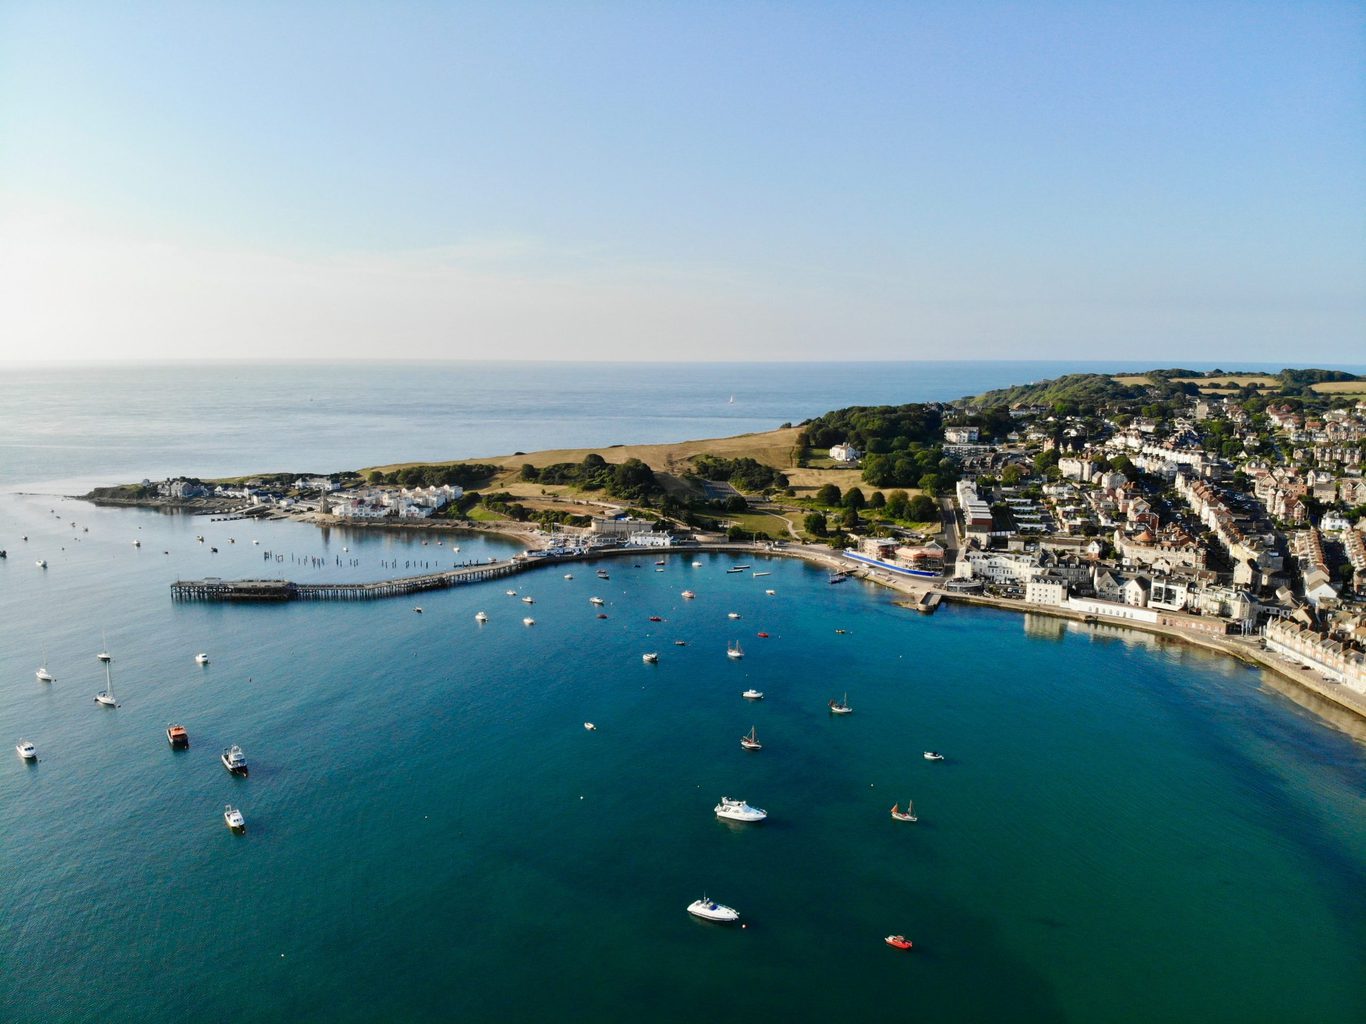 Aerial shot of Swanage Bay on a sunny day with the headland stretching out into the blue sea on the far side of the bay. there are many small boats moored in the bay and a small town along the shore. 17 Things to do in Swanage Dorset